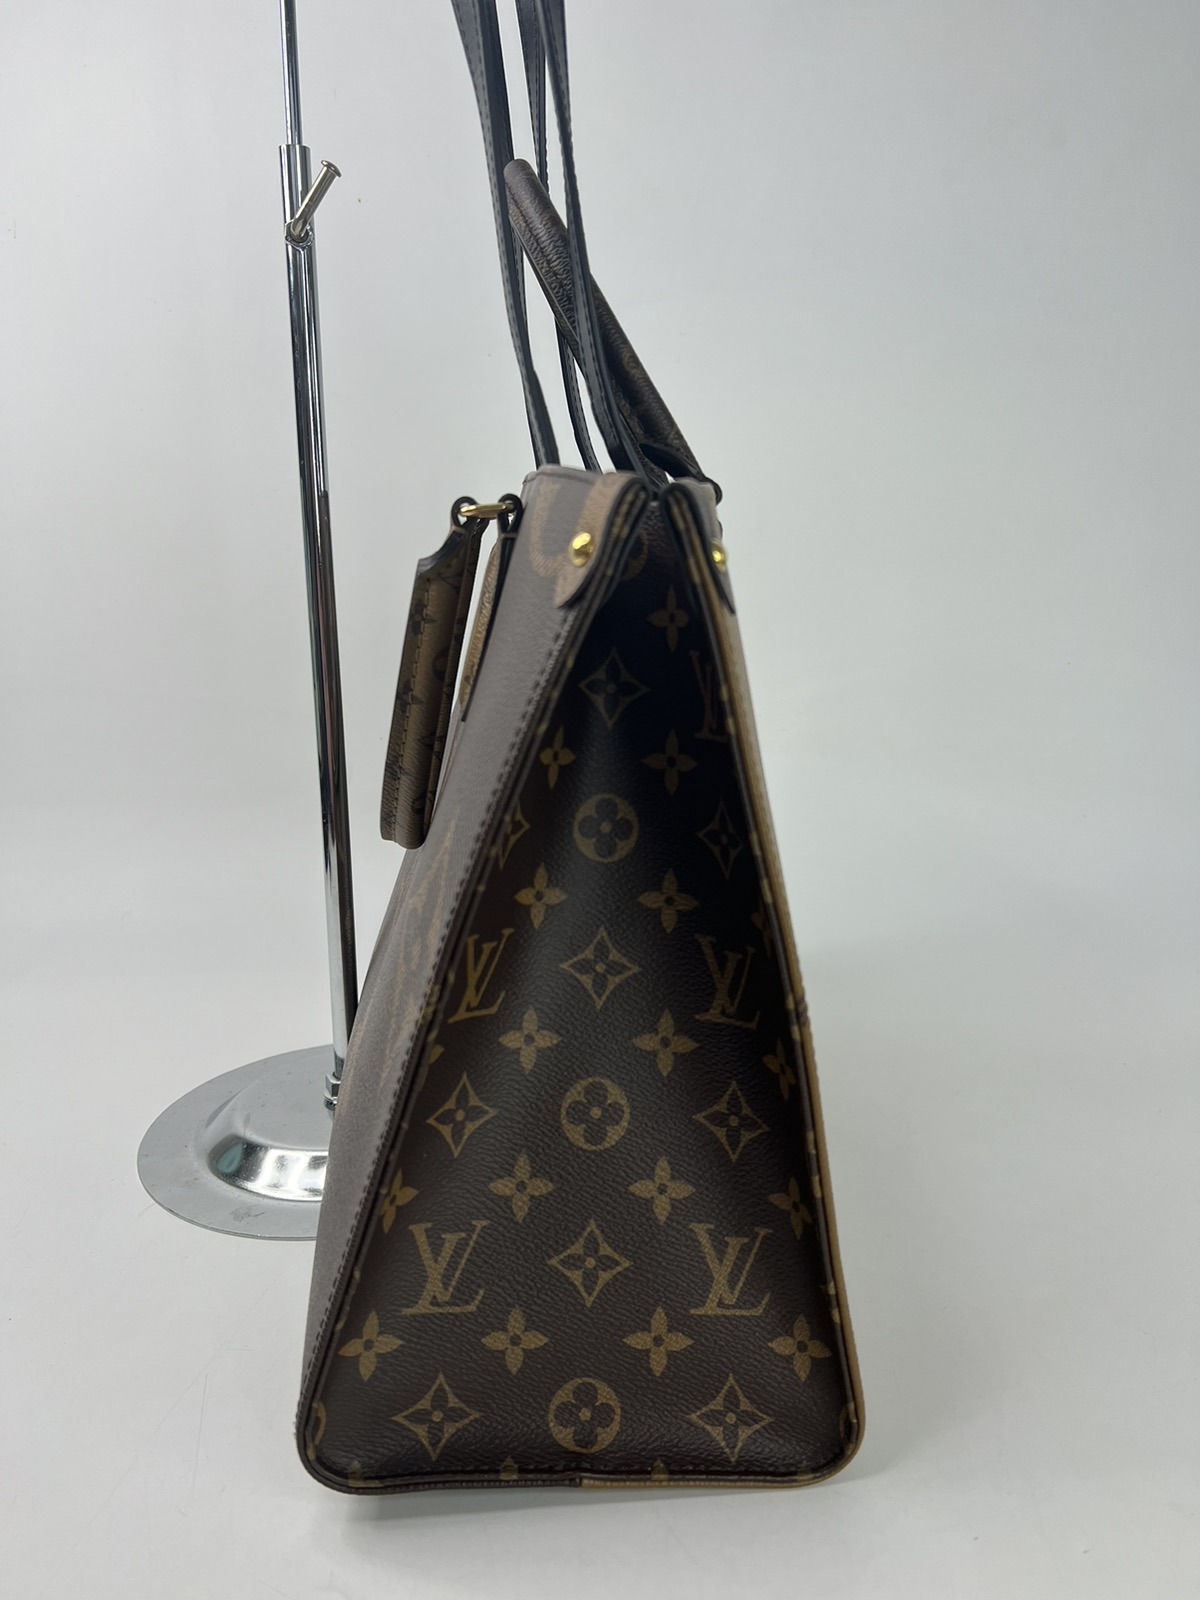 ✨NEW✨ : LV On The Go East West Monogram Reverse Microchip Size 25.0 x 13.0  x 10.0 ซม.